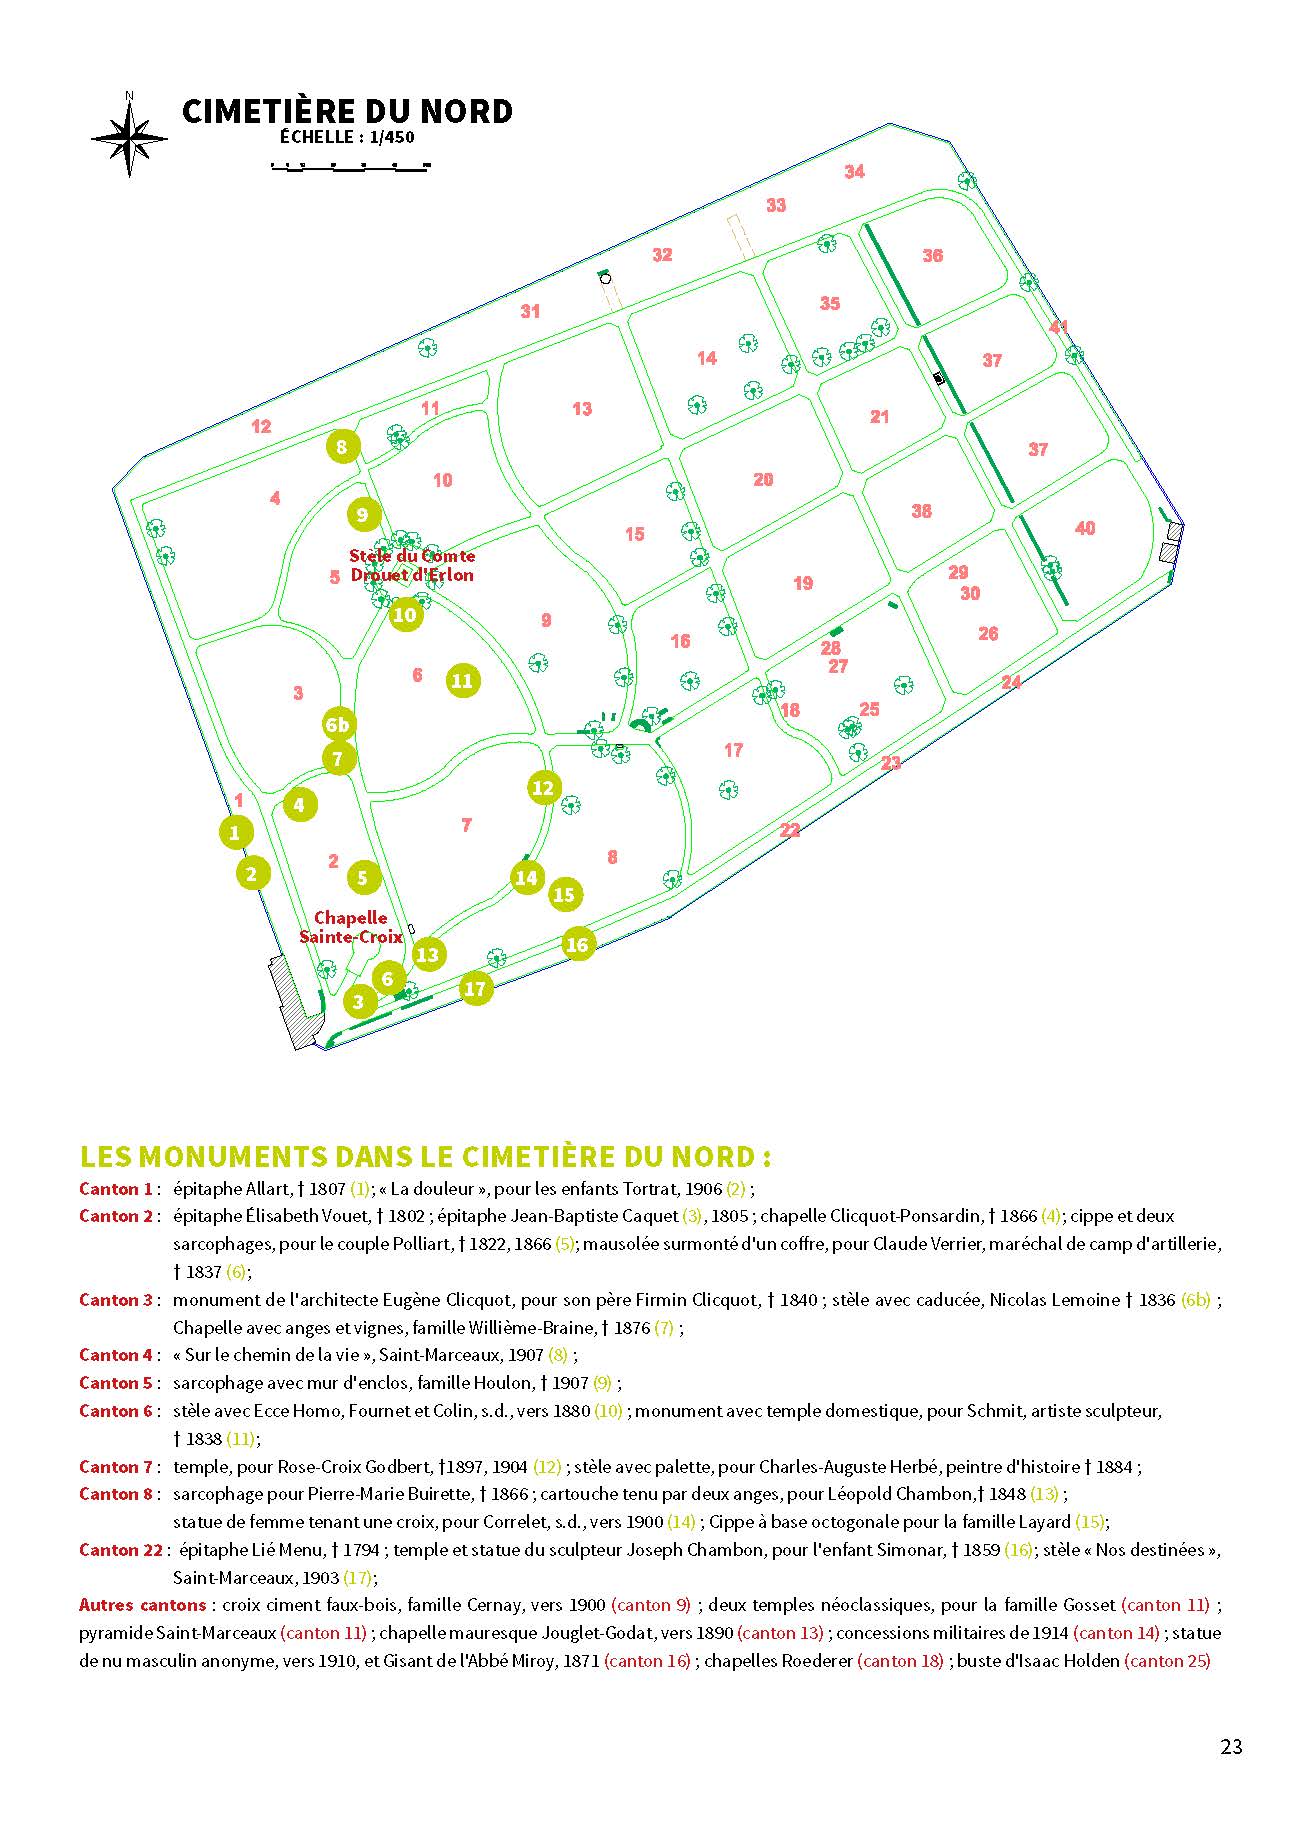 Cemetery map of Cimetiere du Nord in Reims, France.